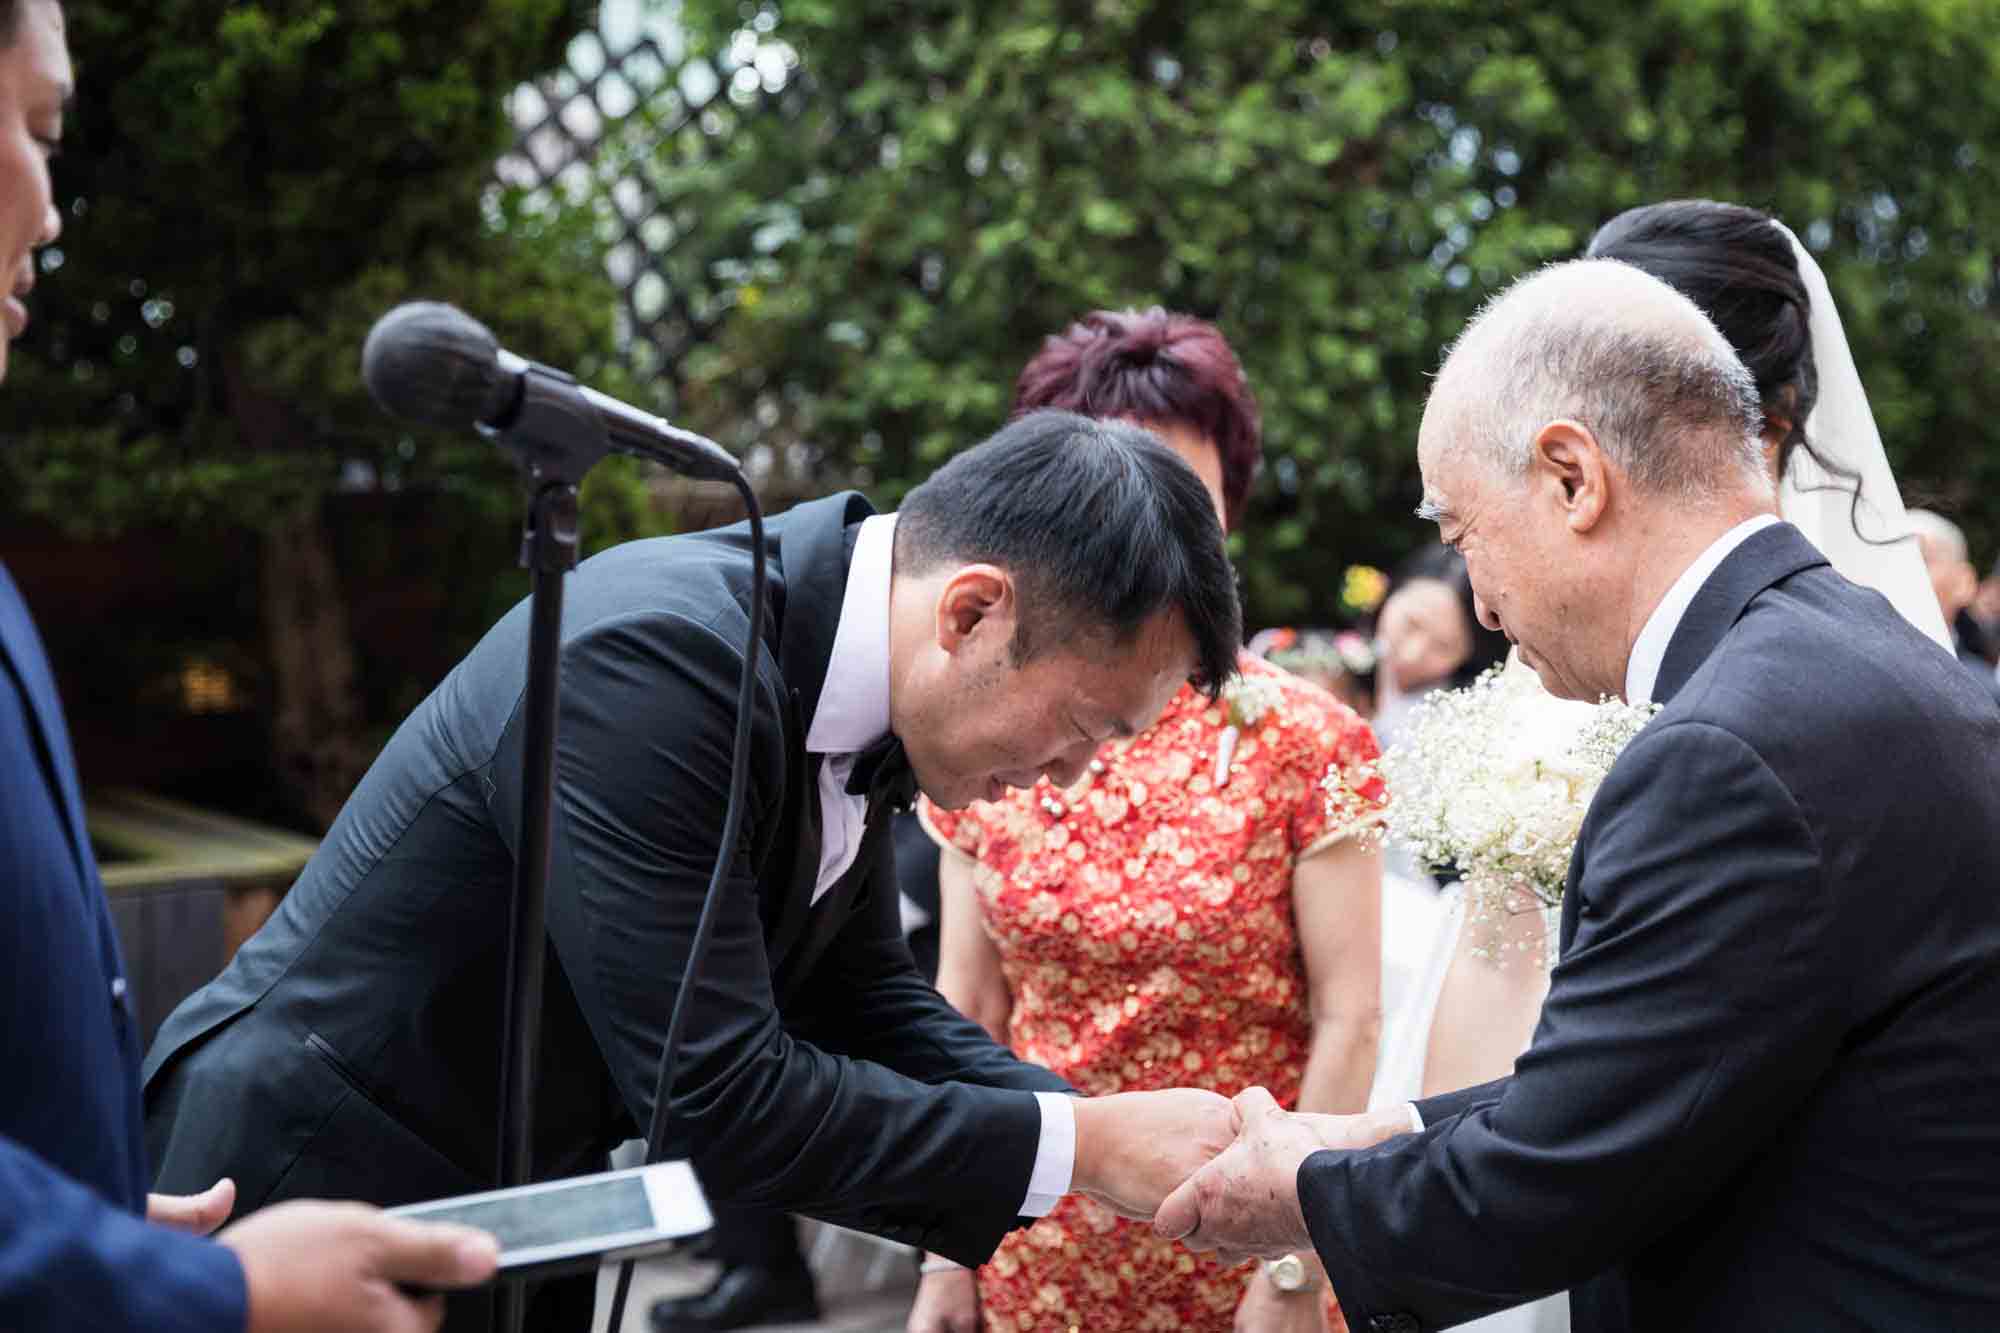 Groom bowing and shaking hand of bride's father during ceremony at a Sheraton LaGuardia East Hotel wedding